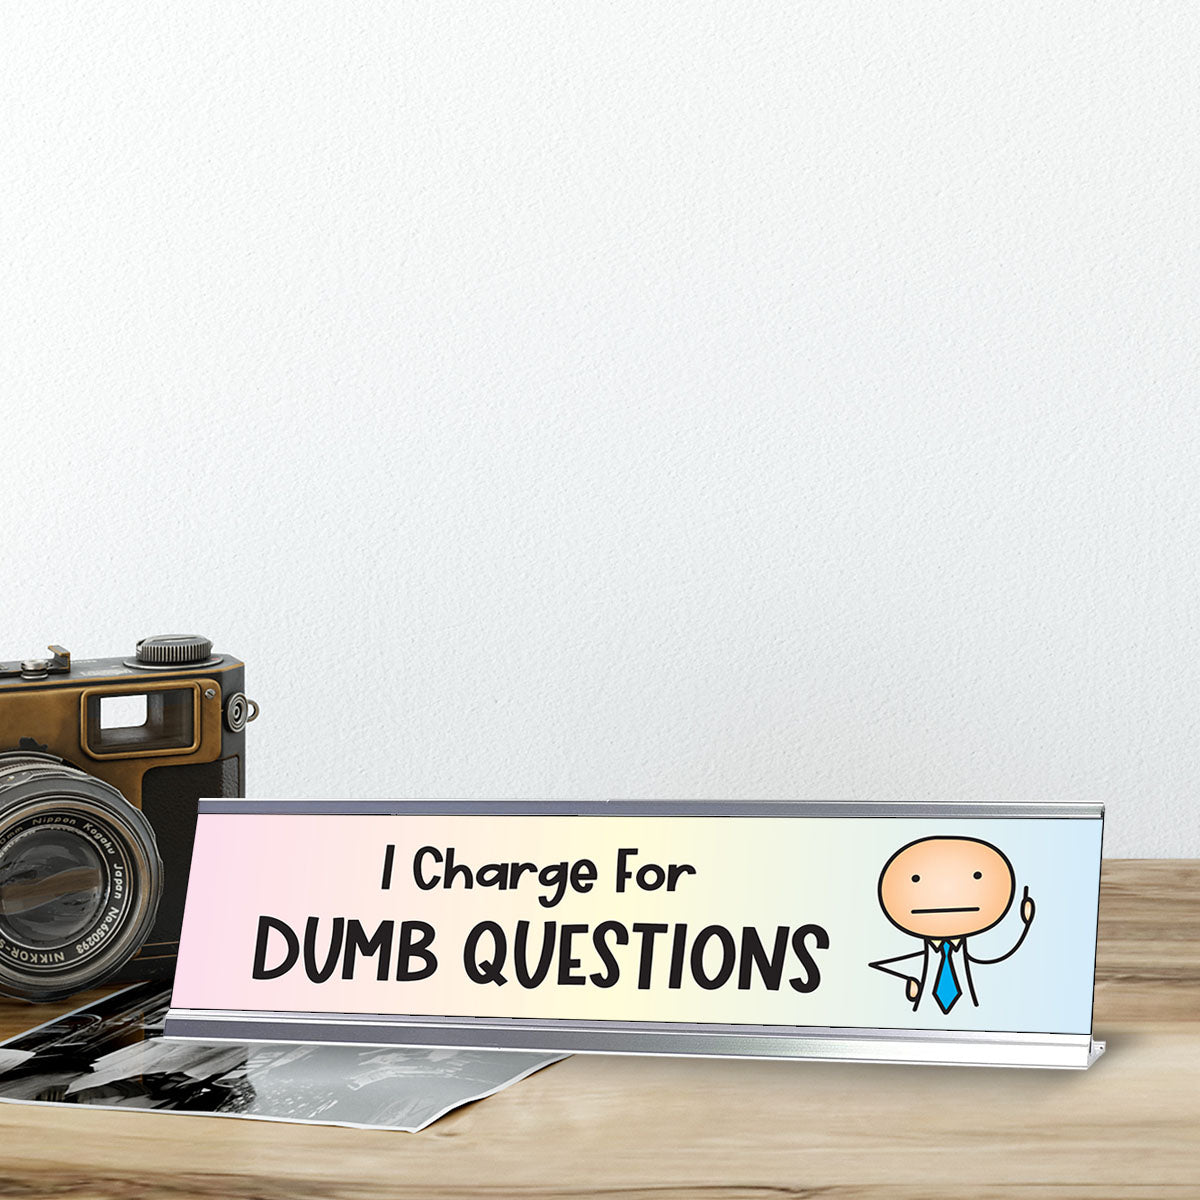 I Charge For Dumb Questions, Stick People Series Desk Sign (2 x 8")